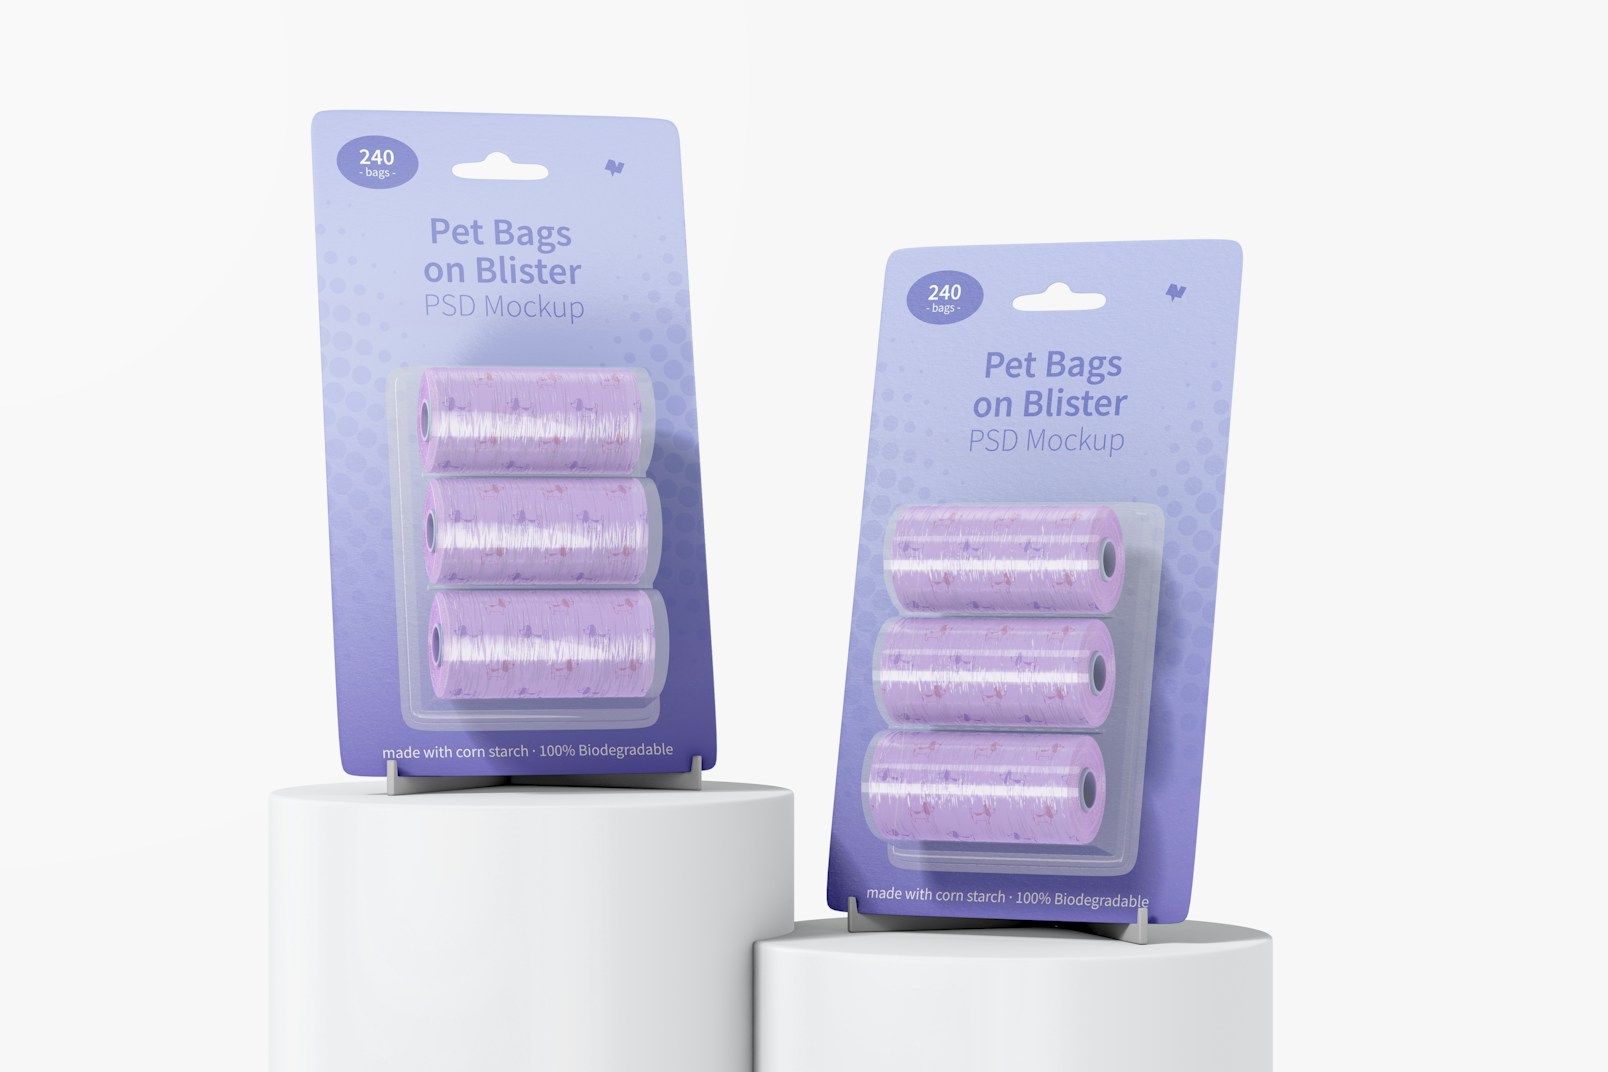 Pet Bags on Blister Mockup, Perspective View